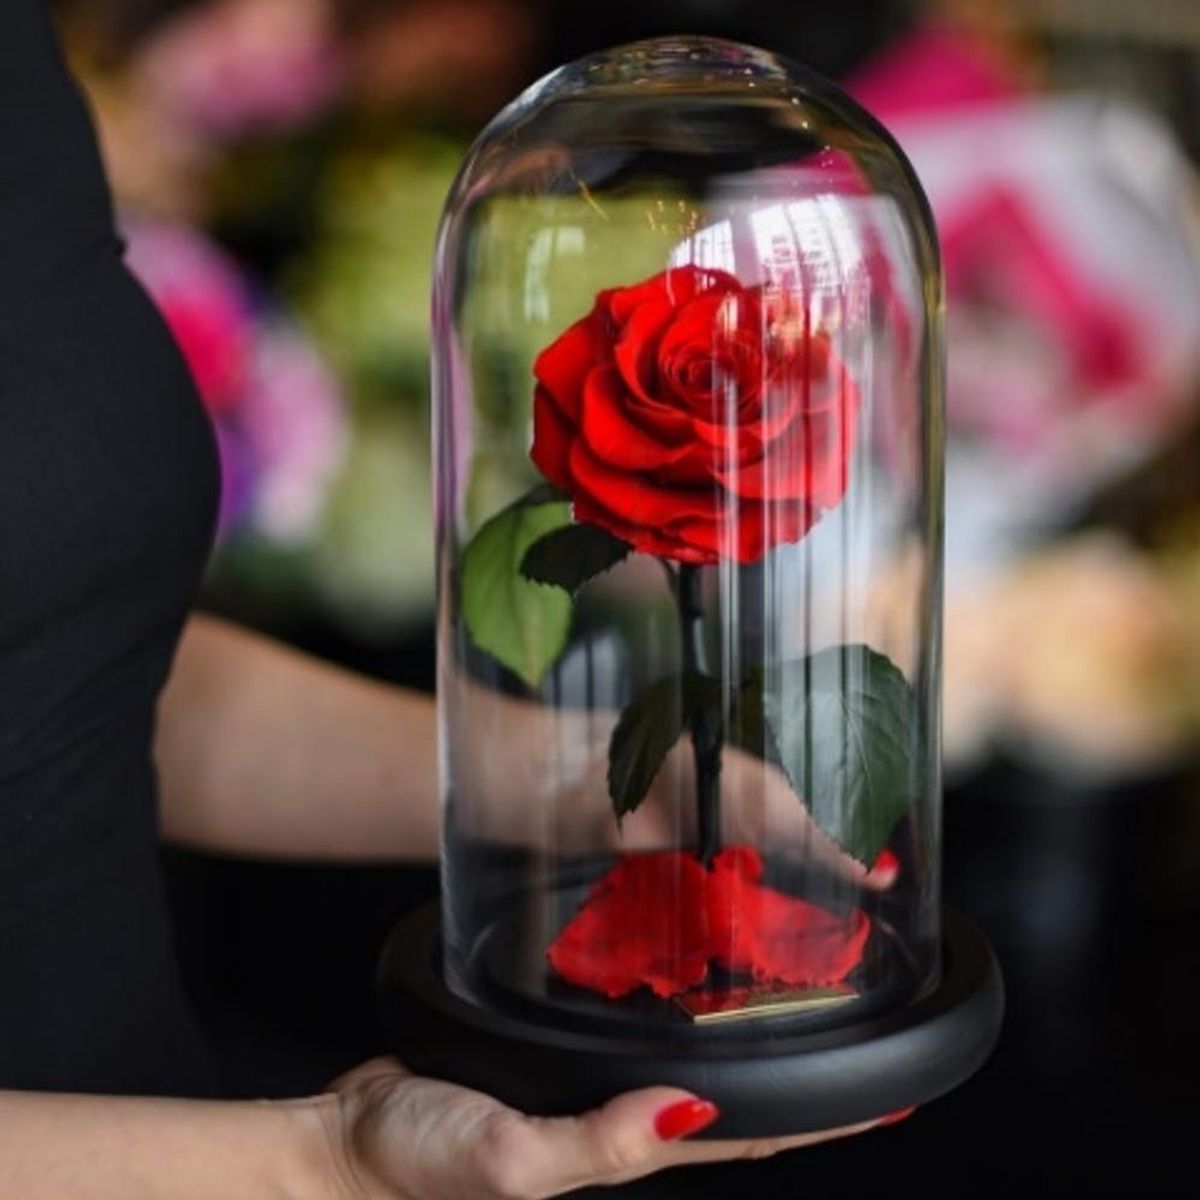 These Totally Real Beauty and the Beast-like Enchanted Roses Last FOREVER